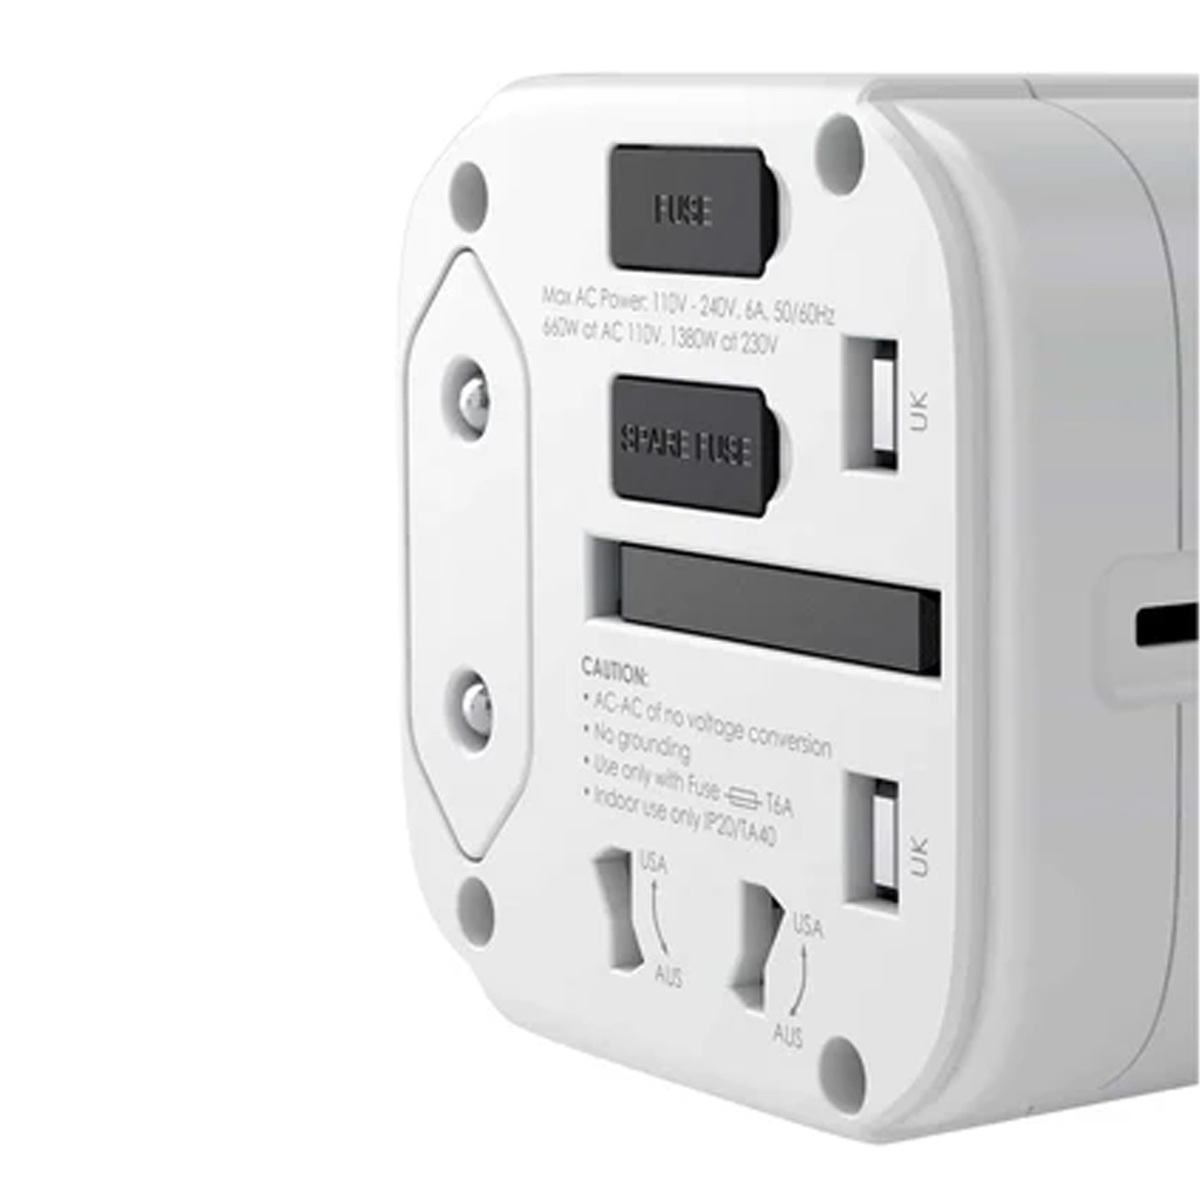 Aukey Universal Travel Adapter With USB-C and USB-A Ports, White, PA-TA01